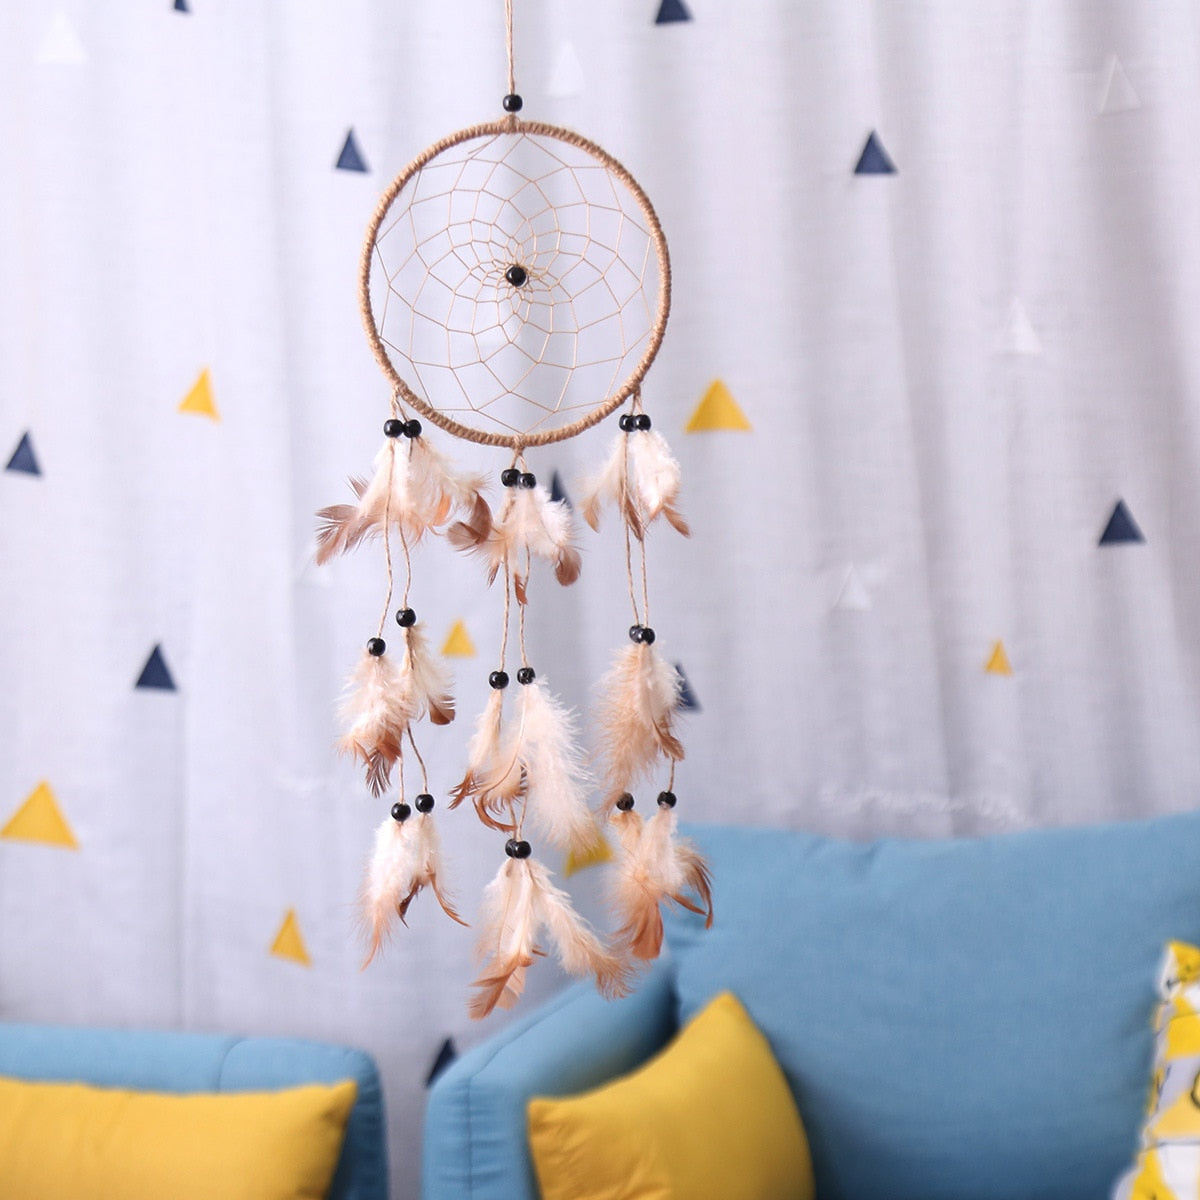 Hand-Woven Dreamcatcher Hanging and Retro Style Home Decoration Wind Chimes